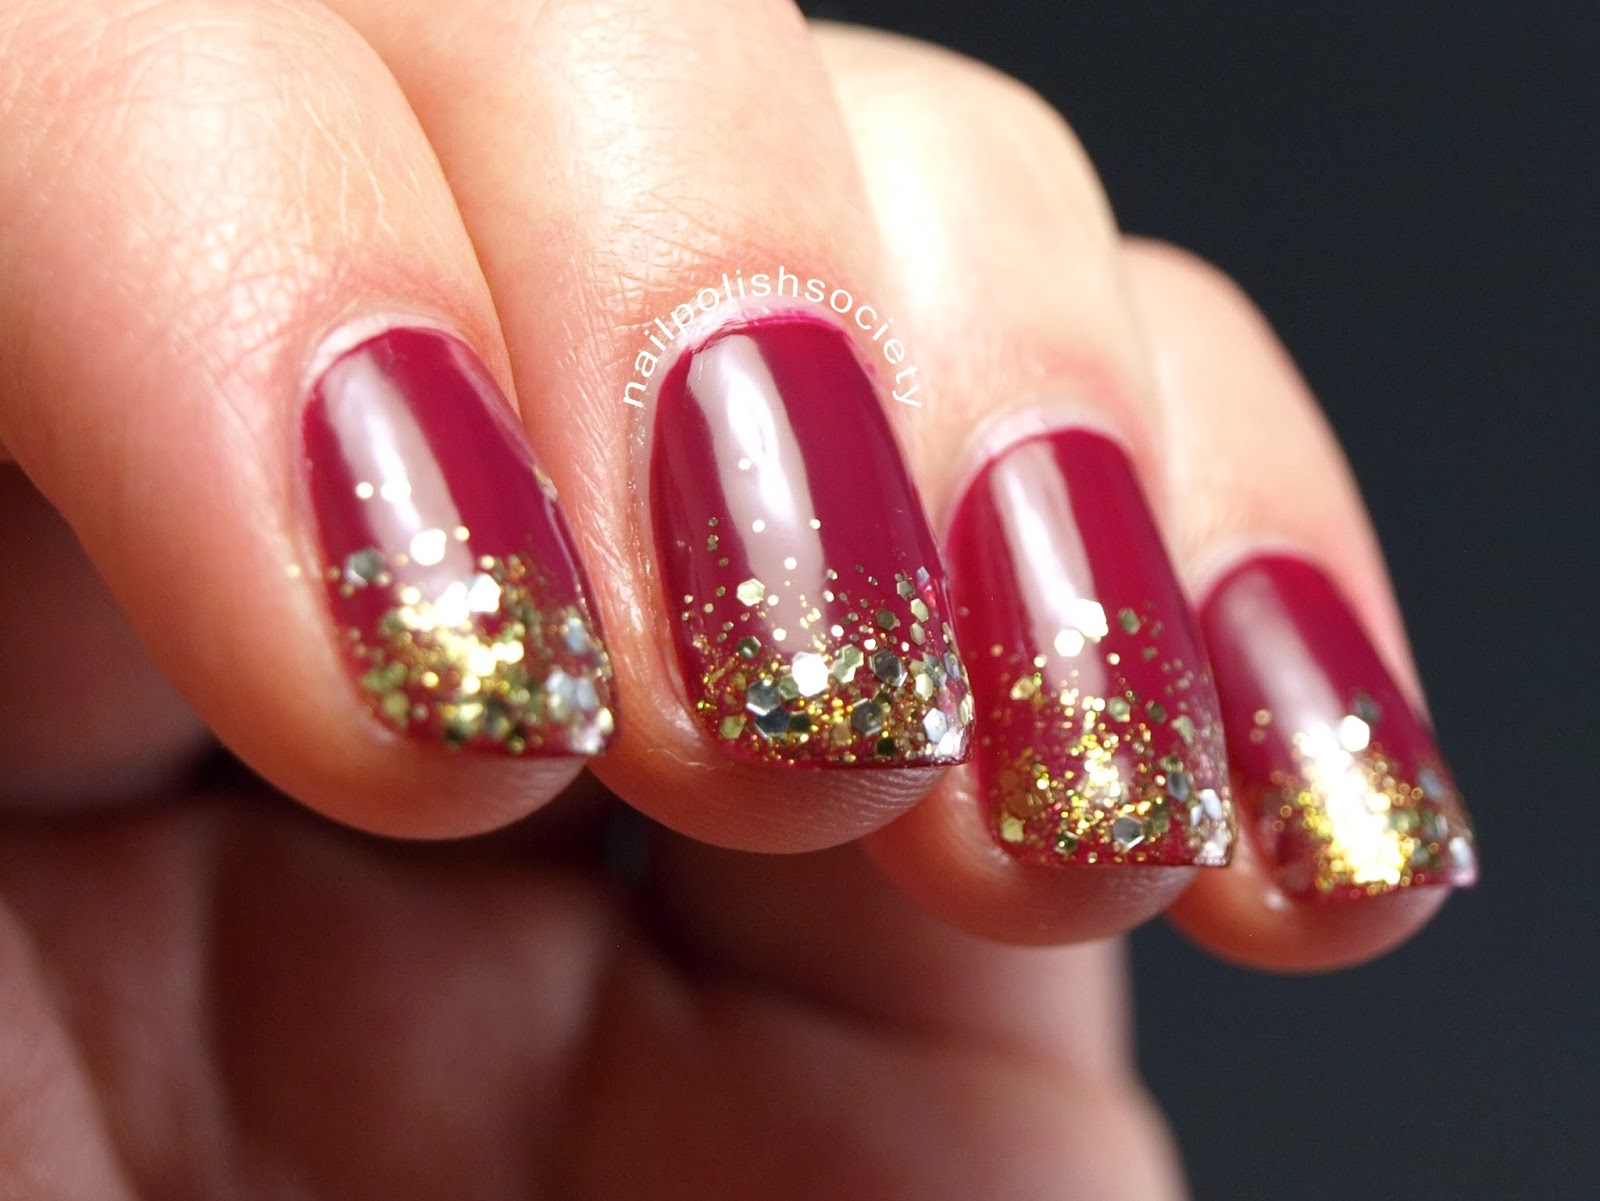 1. Glitter Party Nails - wide 3